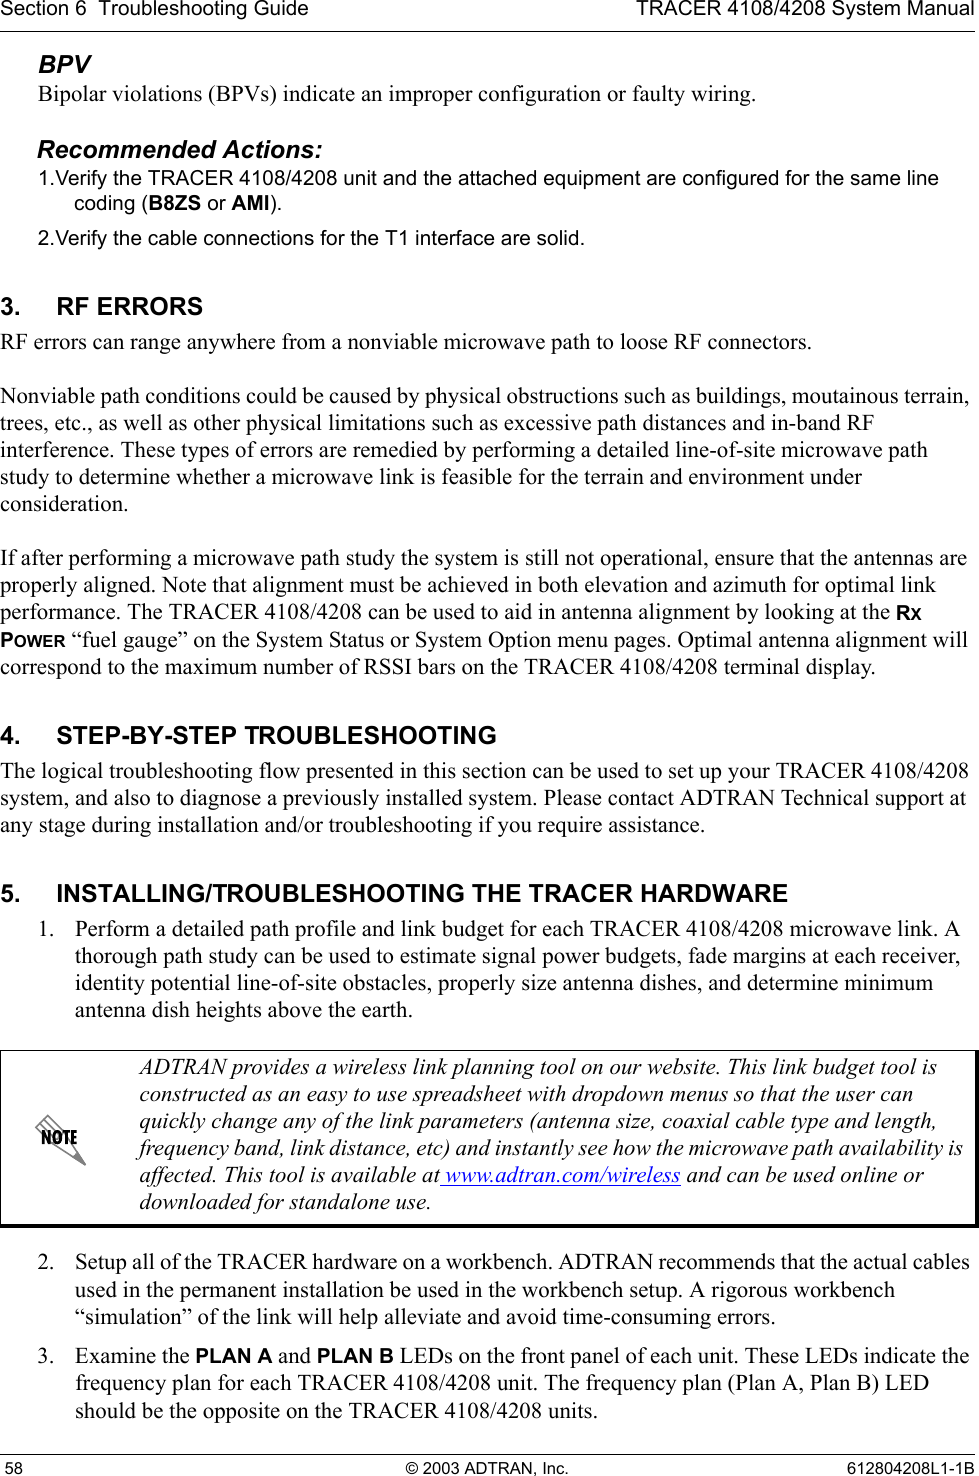 Section 6  Troubleshooting Guide TRACER 4108/4208 System Manual 58 © 2003 ADTRAN, Inc. 612804208L1-1BBPVBipolar violations (BPVs) indicate an improper configuration or faulty wiring.Recommended Actions:1.Verify the TRACER 4108/4208 unit and the attached equipment are configured for the same line coding (B8ZS or AMI).2.Verify the cable connections for the T1 interface are solid.3. RF ERRORSRF errors can range anywhere from a nonviable microwave path to loose RF connectors.Nonviable path conditions could be caused by physical obstructions such as buildings, moutainous terrain, trees, etc., as well as other physical limitations such as excessive path distances and in-band RF interference. These types of errors are remedied by performing a detailed line-of-site microwave path study to determine whether a microwave link is feasible for the terrain and environment under consideration.If after performing a microwave path study the system is still not operational, ensure that the antennas are properly aligned. Note that alignment must be achieved in both elevation and azimuth for optimal link performance. The TRACER 4108/4208 can be used to aid in antenna alignment by looking at the RX POWER “fuel gauge” on the System Status or System Option menu pages. Optimal antenna alignment will correspond to the maximum number of RSSI bars on the TRACER 4108/4208 terminal display.4. STEP-BY-STEP TROUBLESHOOTINGThe logical troubleshooting flow presented in this section can be used to set up your TRACER 4108/4208 system, and also to diagnose a previously installed system. Please contact ADTRAN Technical support at any stage during installation and/or troubleshooting if you require assistance.5. INSTALLING/TROUBLESHOOTING THE TRACER HARDWARE1. Perform a detailed path profile and link budget for each TRACER 4108/4208 microwave link. A thorough path study can be used to estimate signal power budgets, fade margins at each receiver, identity potential line-of-site obstacles, properly size antenna dishes, and determine minimum antenna dish heights above the earth.2. Setup all of the TRACER hardware on a workbench. ADTRAN recommends that the actual cables used in the permanent installation be used in the workbench setup. A rigorous workbench “simulation” of the link will help alleviate and avoid time-consuming errors.3. Examine the PLAN A and PLAN B LEDs on the front panel of each unit. These LEDs indicate the frequency plan for each TRACER 4108/4208 unit. The frequency plan (Plan A, Plan B) LED should be the opposite on the TRACER 4108/4208 units. ADTRAN provides a wireless link planning tool on our website. This link budget tool is constructed as an easy to use spreadsheet with dropdown menus so that the user can quickly change any of the link parameters (antenna size, coaxial cable type and length, frequency band, link distance, etc) and instantly see how the microwave path availability is affected. This tool is available at www.adtran.com/wireless and can be used online or downloaded for standalone use.